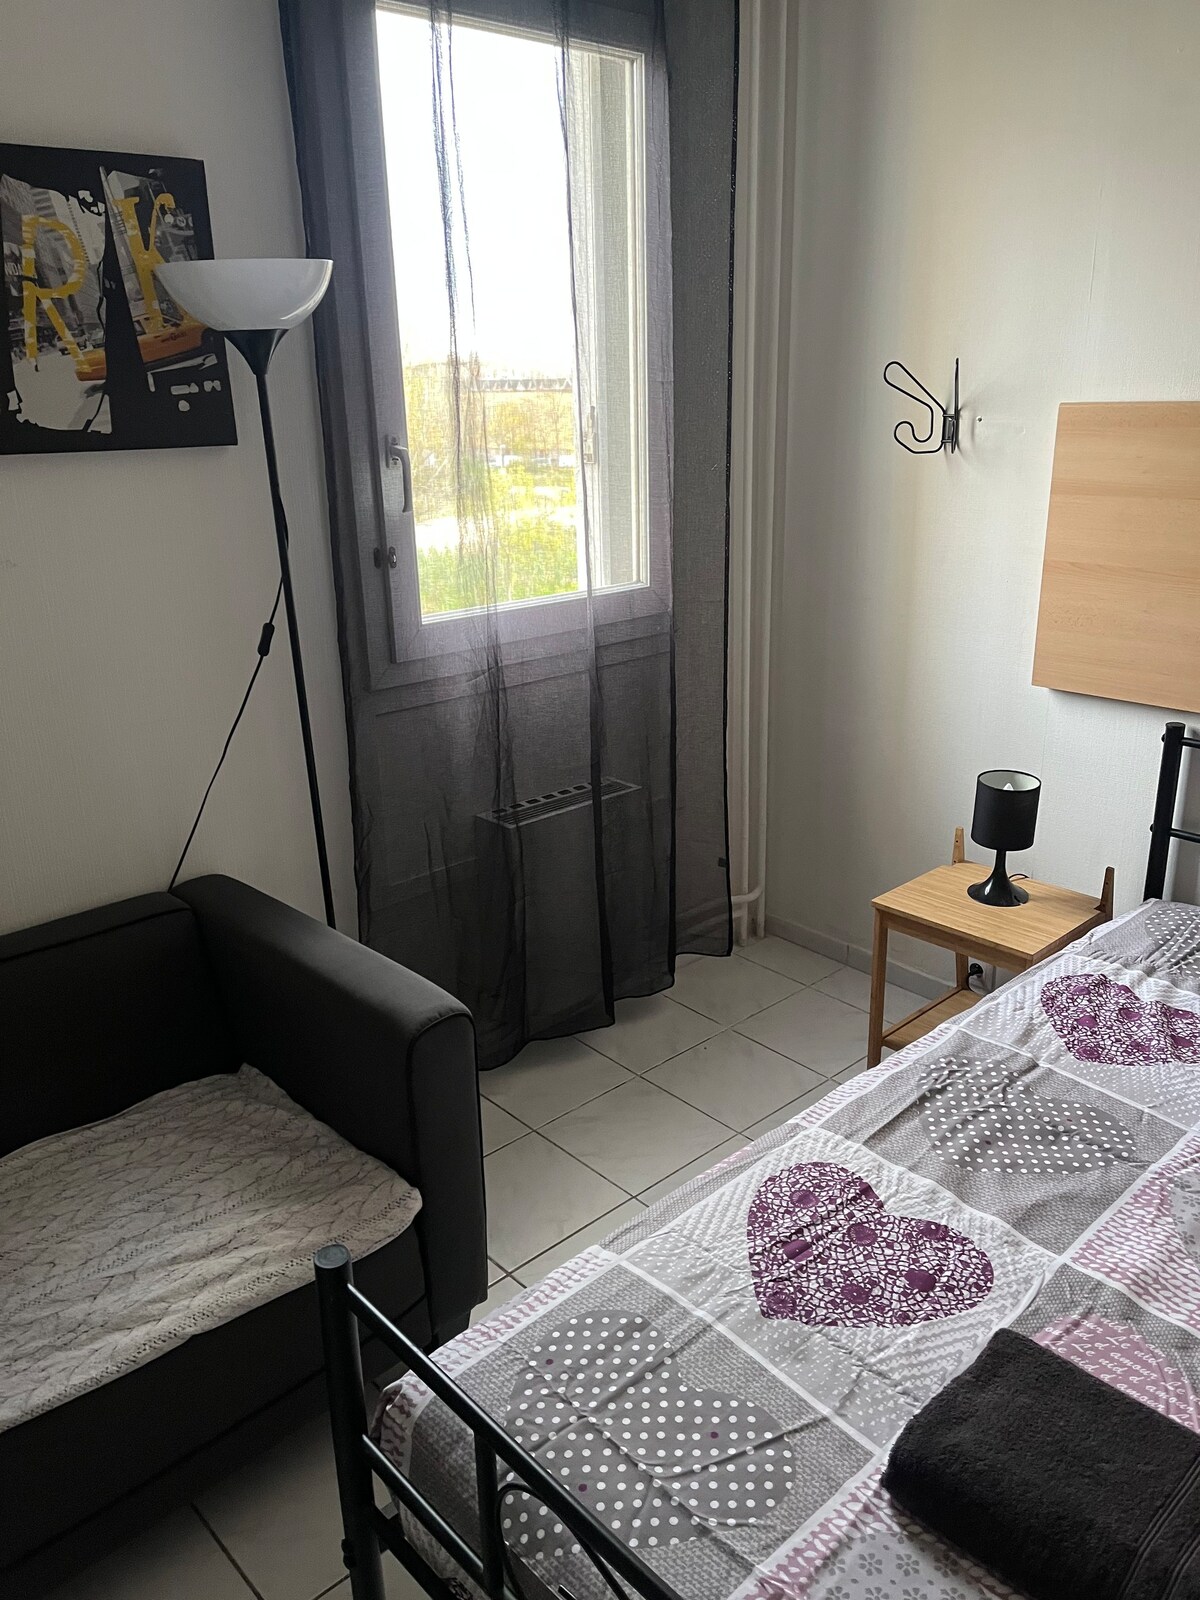 Very Lovely bedroom Close to Stade de France (NYC)